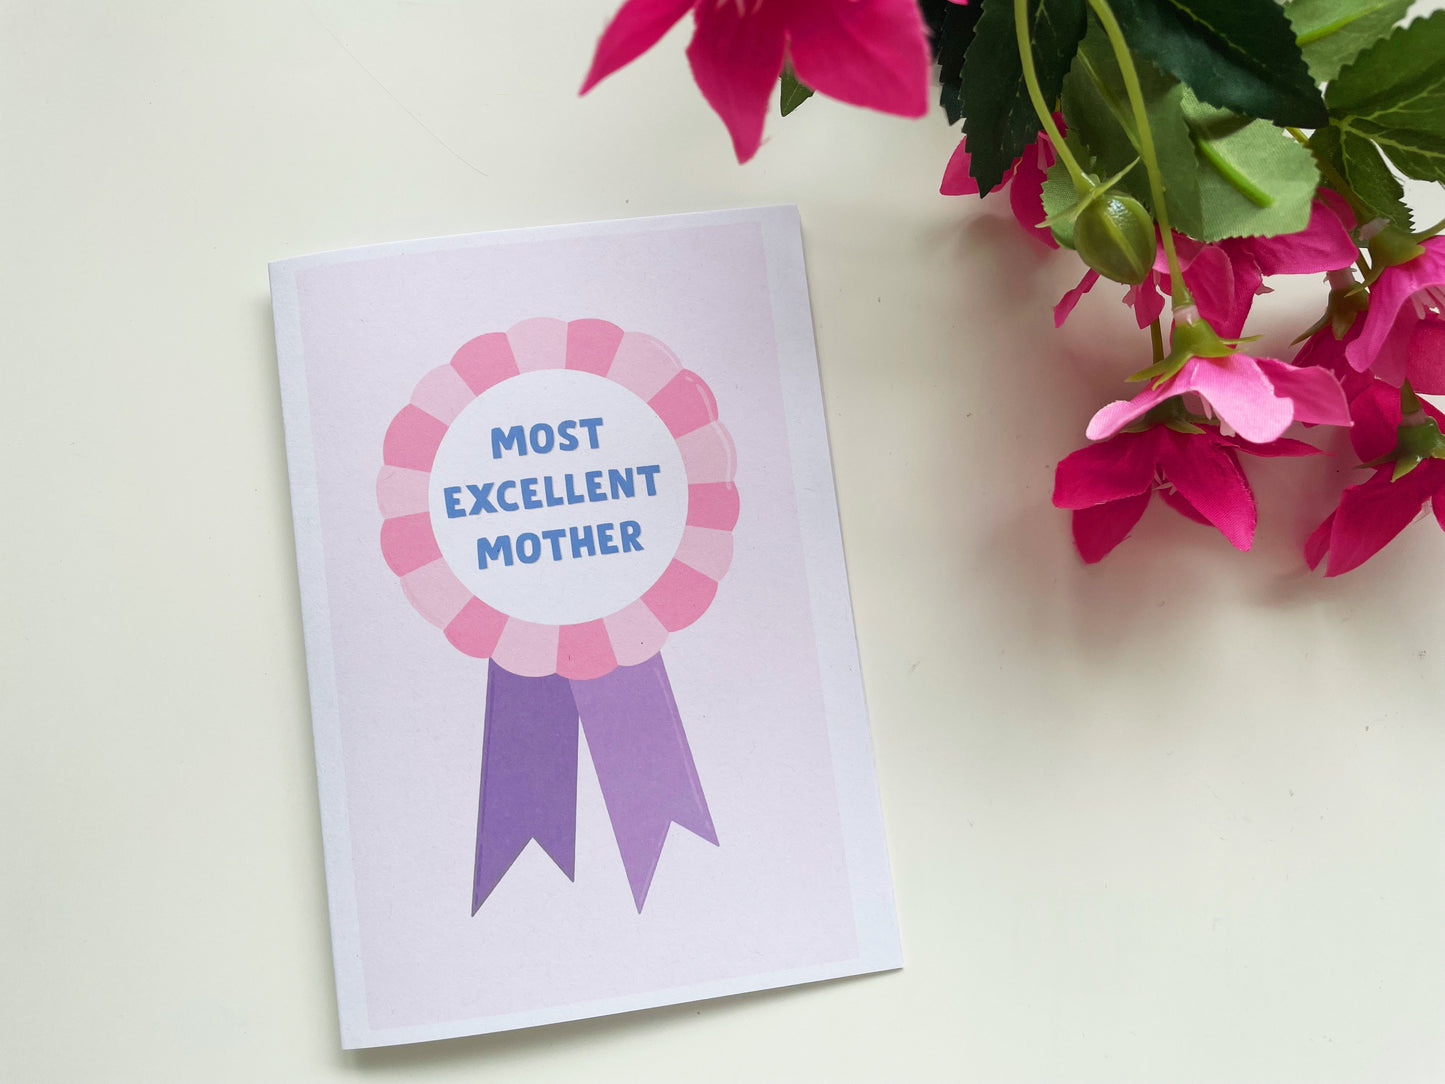 Most Excellent Mother Award Card A6 Greetings Card